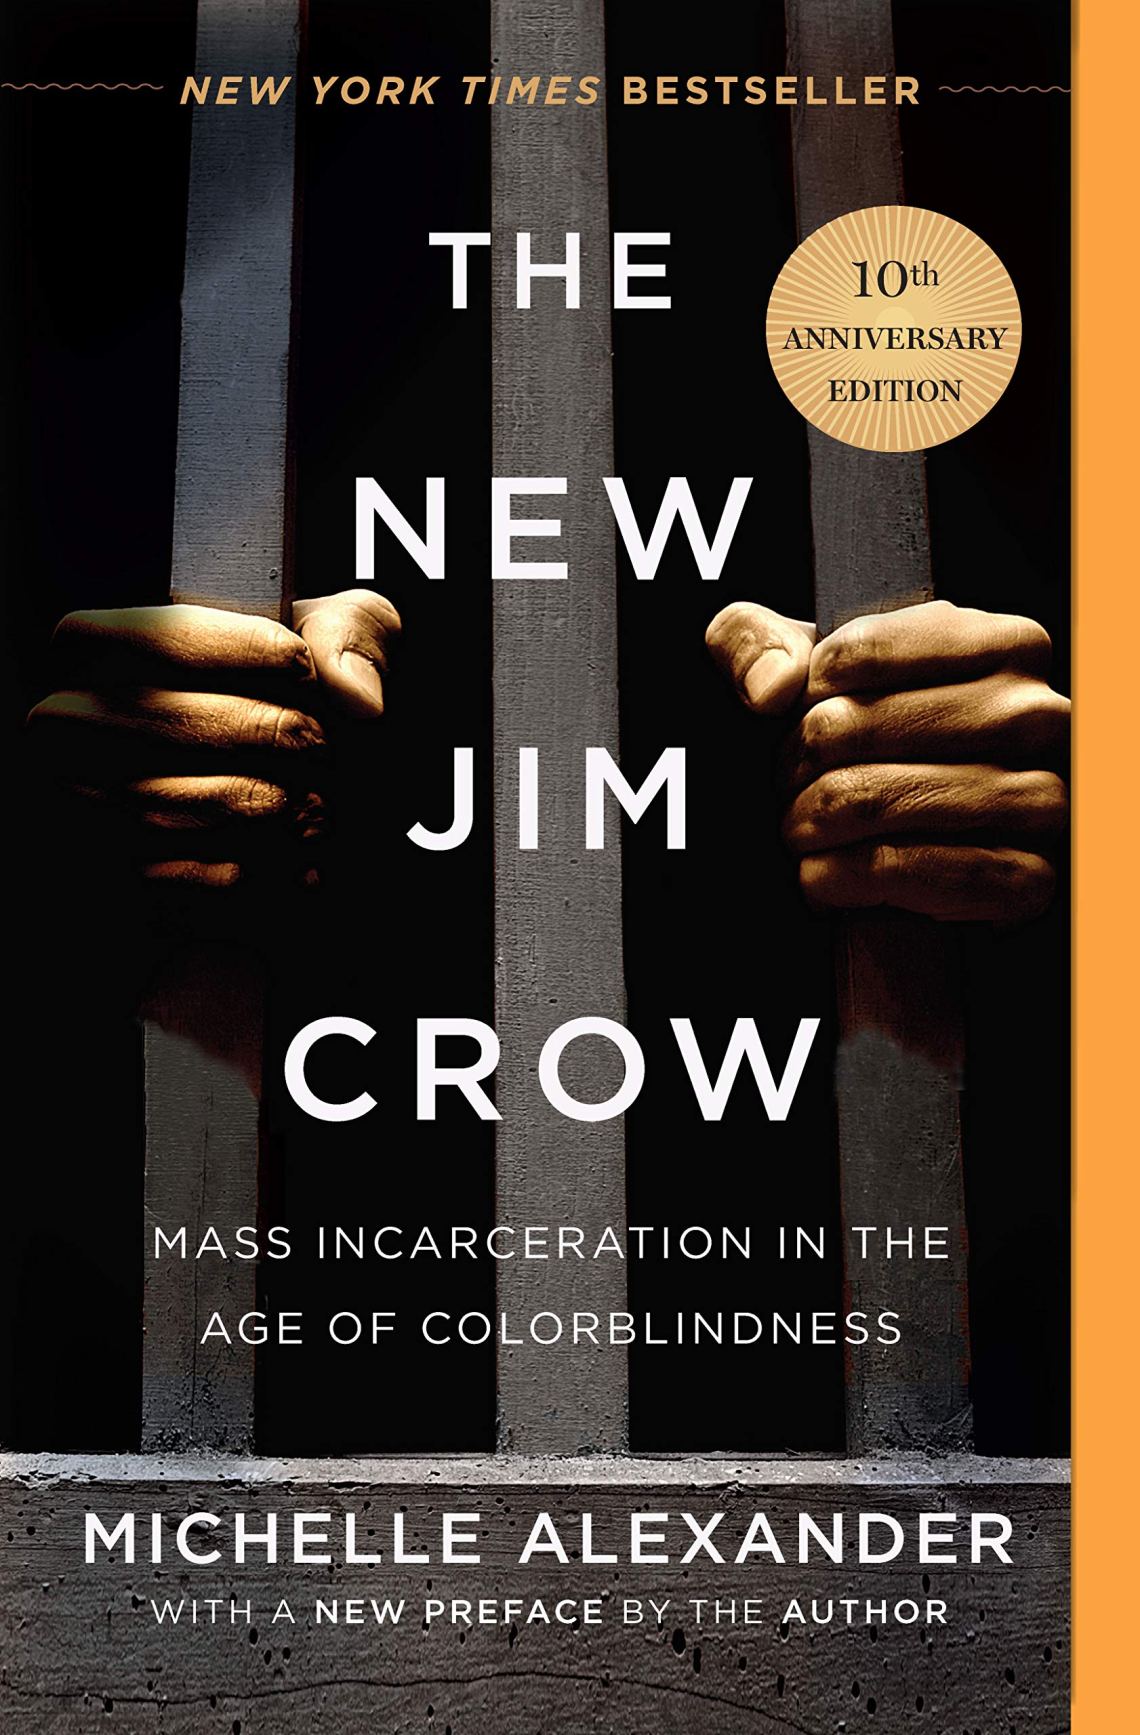 Image of book, The New Jim Crow (Mass Incarceration in the Age of Colorblindness - 10th Anniversary Addition)
Michelle Alexander